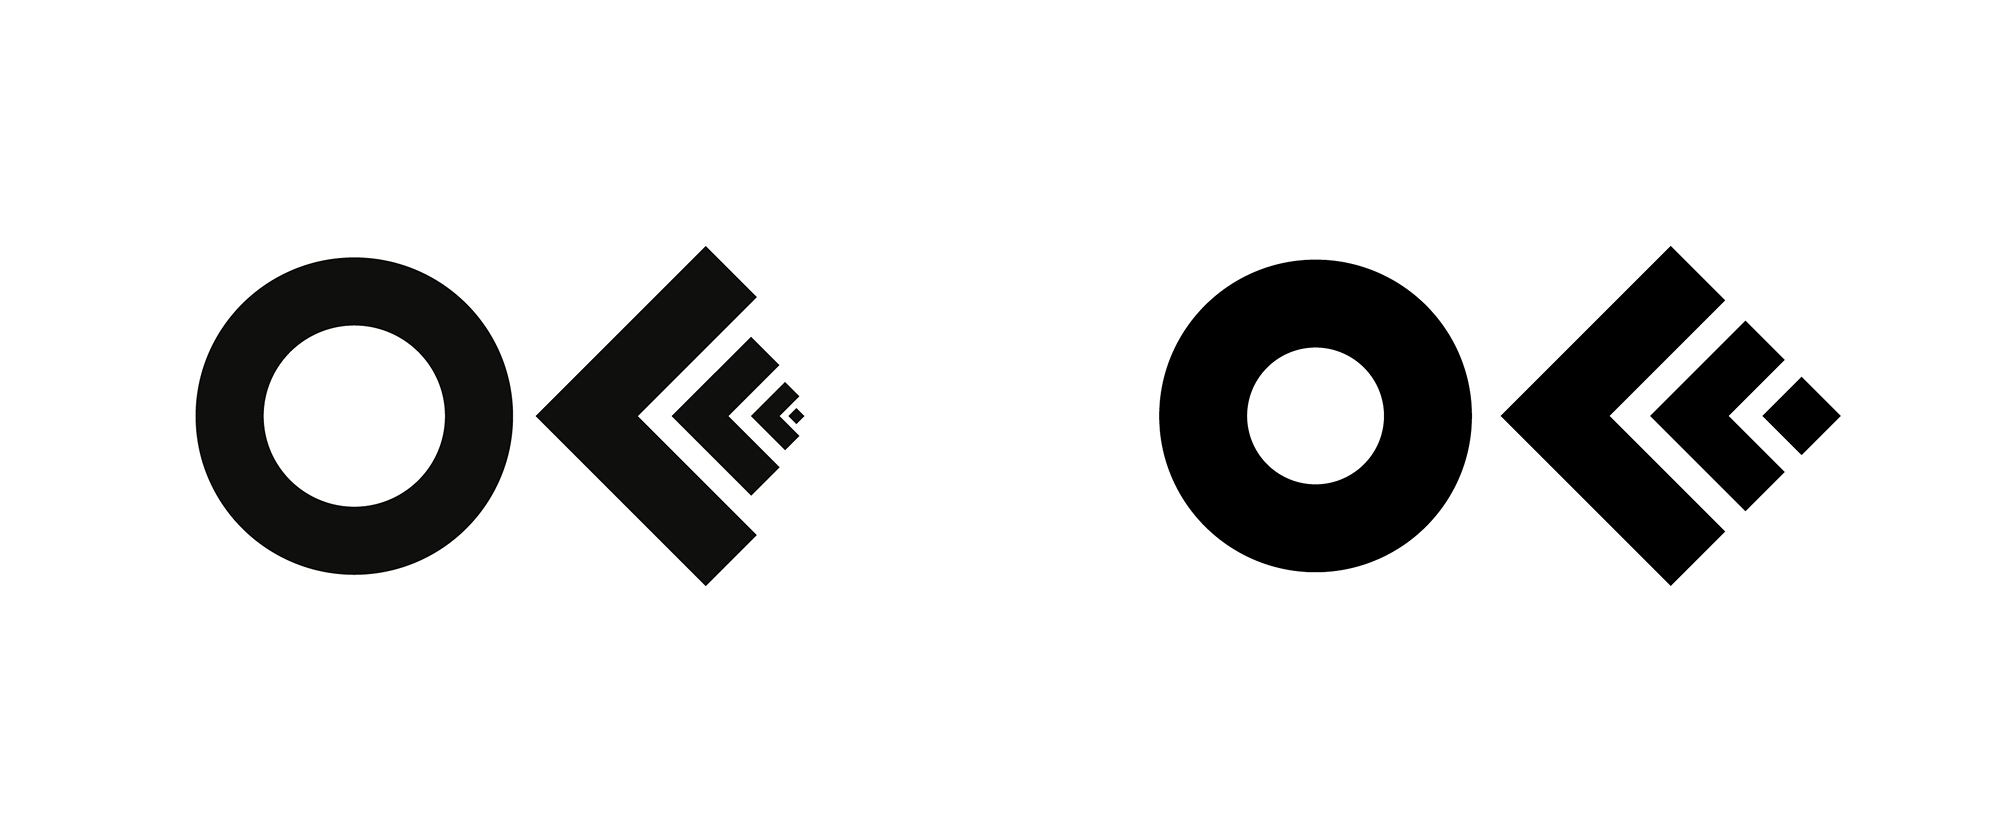 New Logo and Identity for OFFF by Crowd Studio